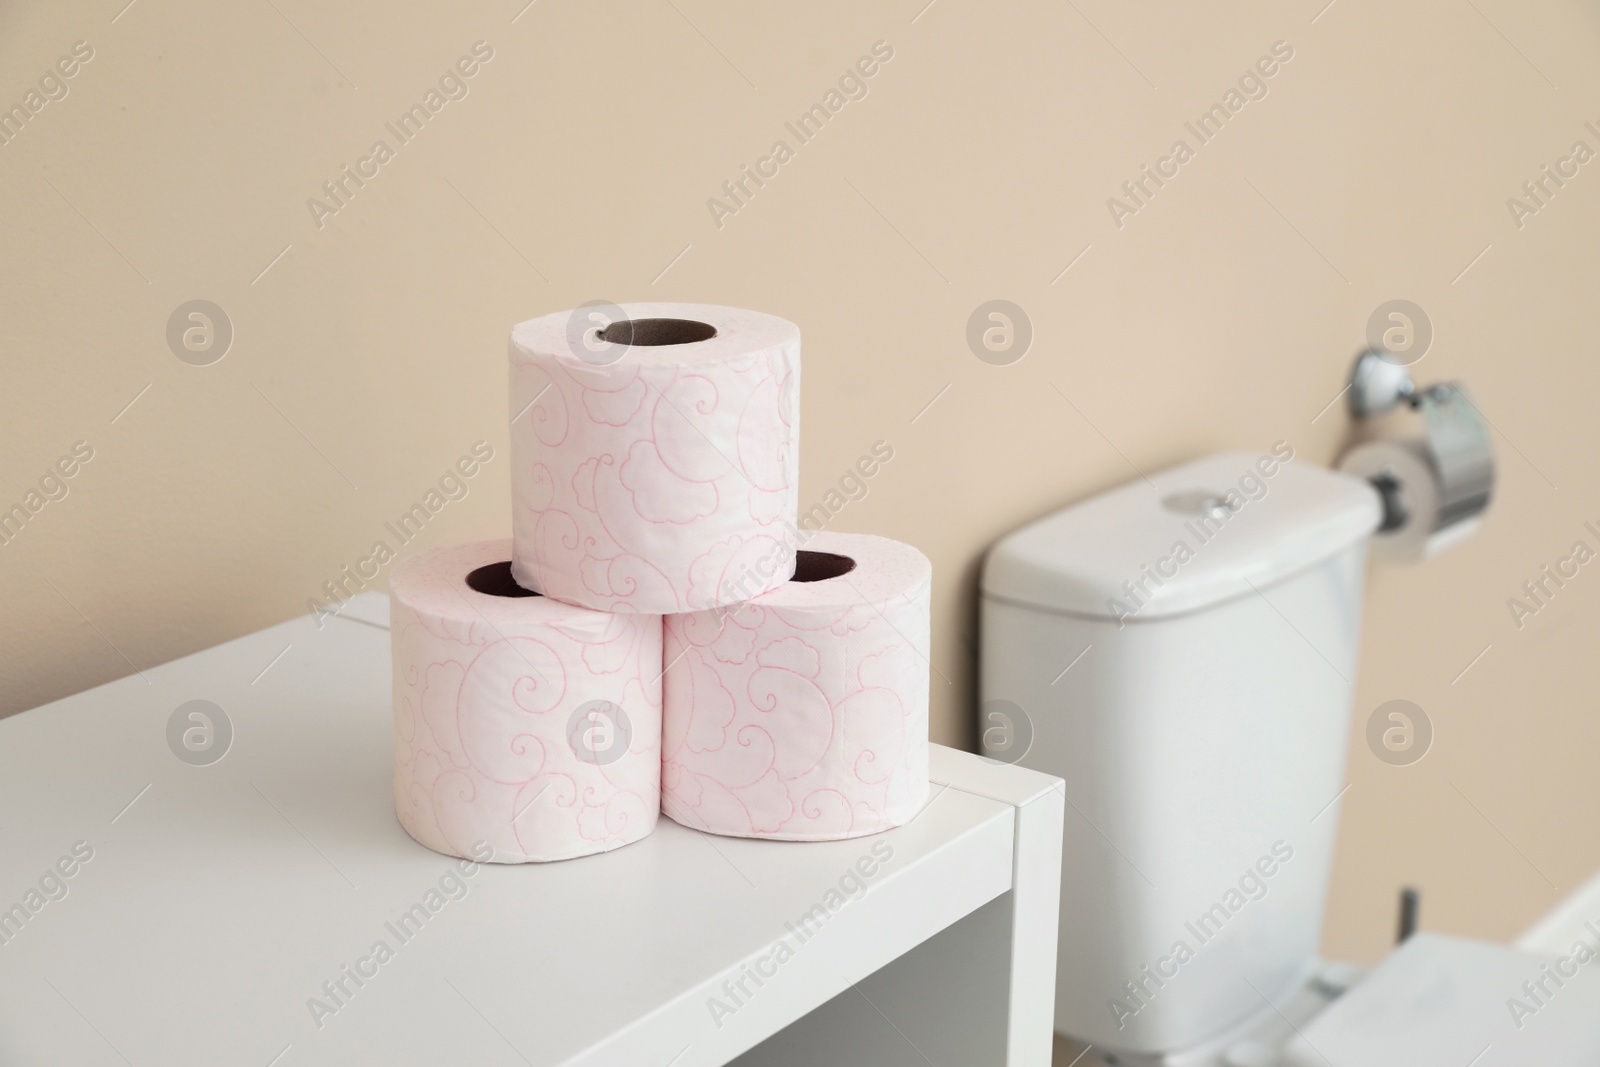 Photo of Toilet paper rolls on cabinet in bathroom